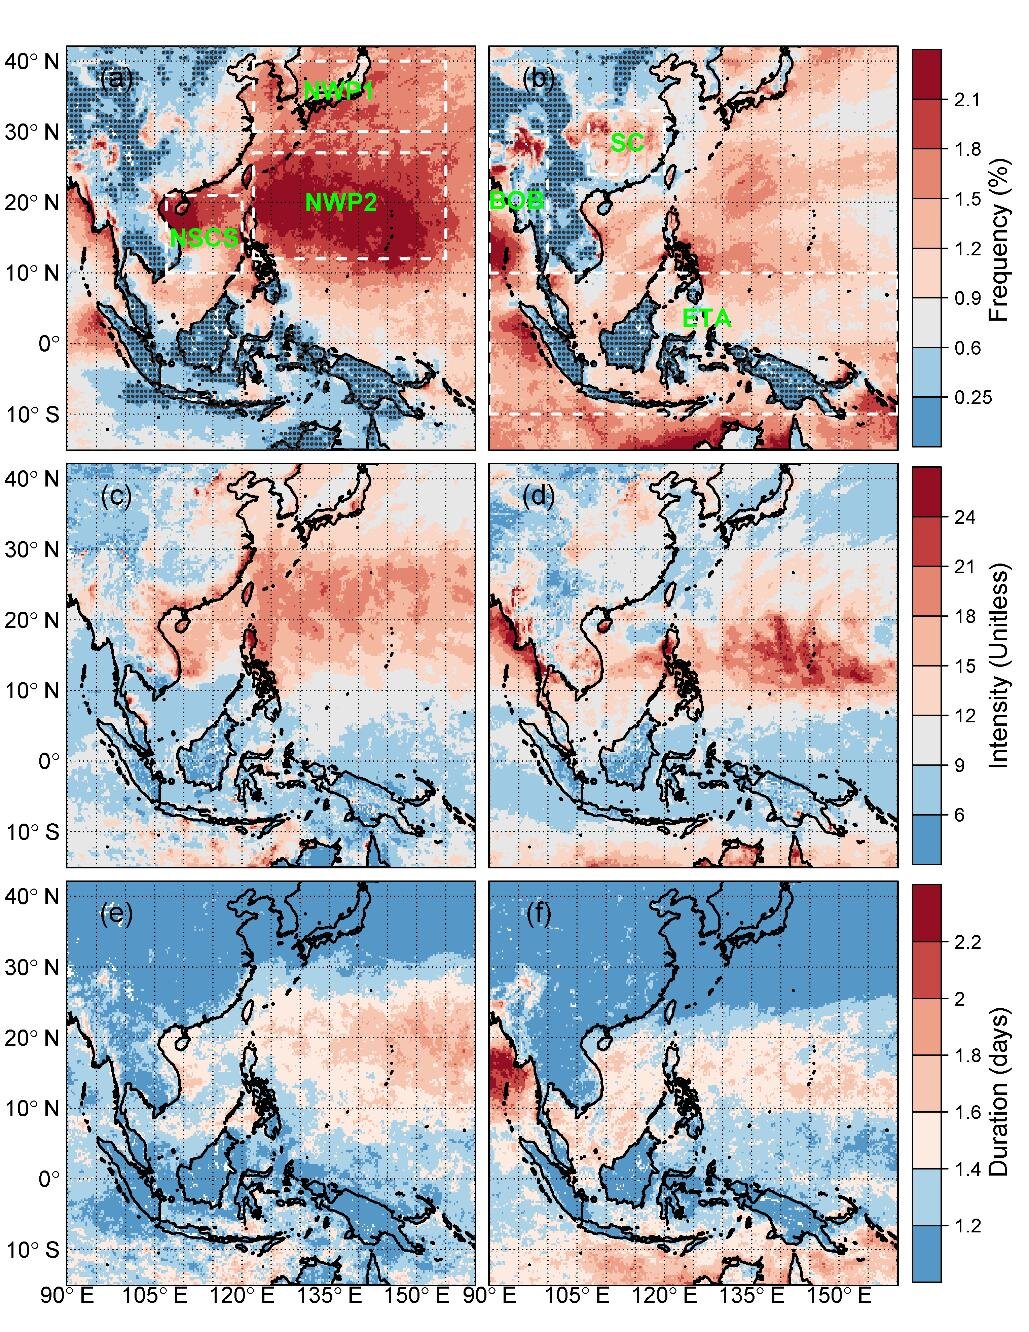 What causes compound wind and precipitation extremes across the Indo-Pacific?